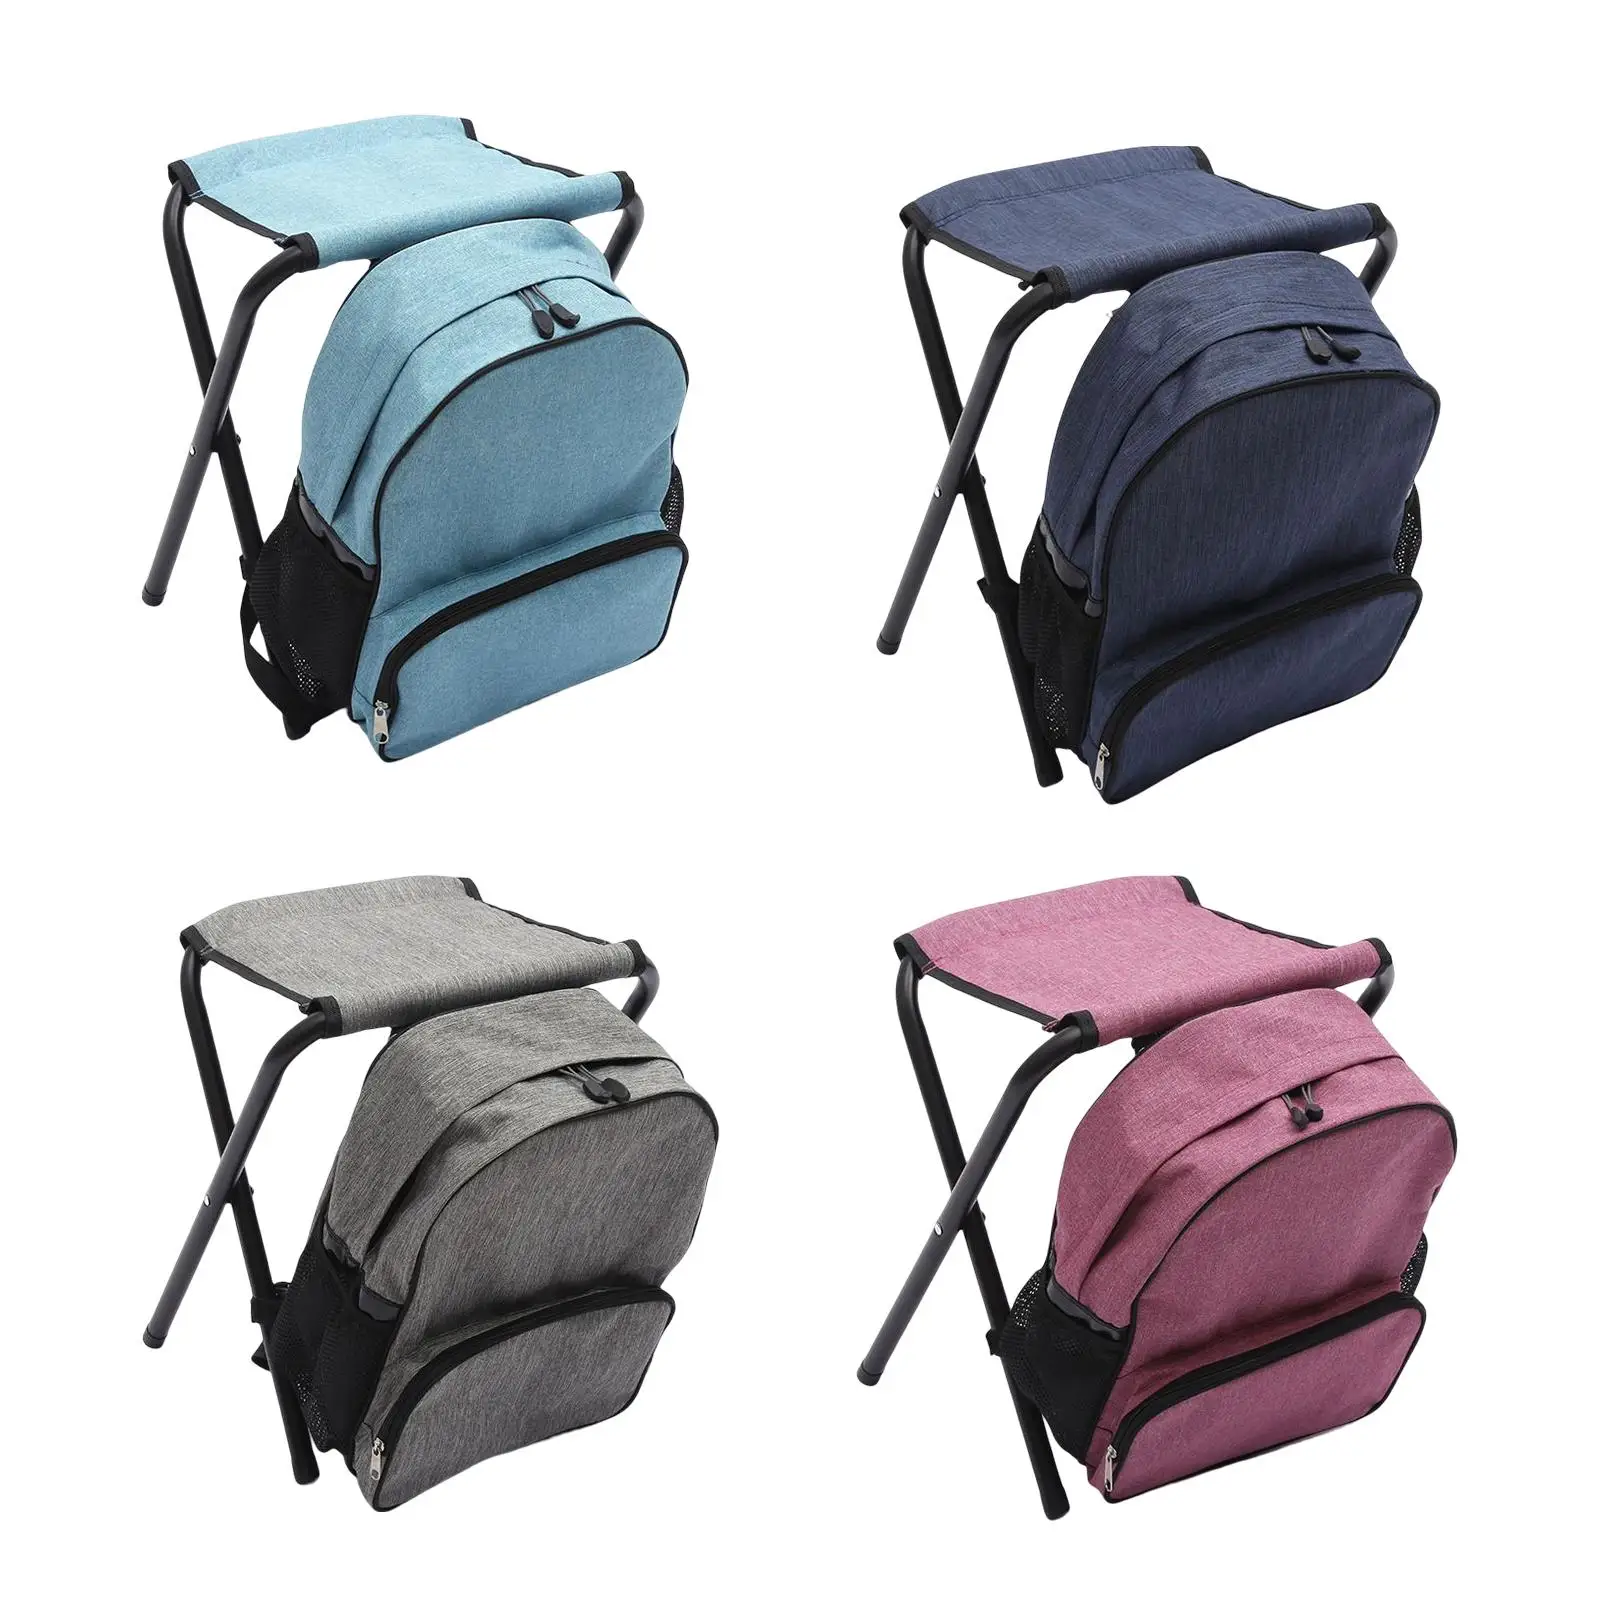 Fishing Seat Portable Multifunction Camp Stool Outdoor Camping Hiking Folding Stool with Bag for Travel Gardening camping